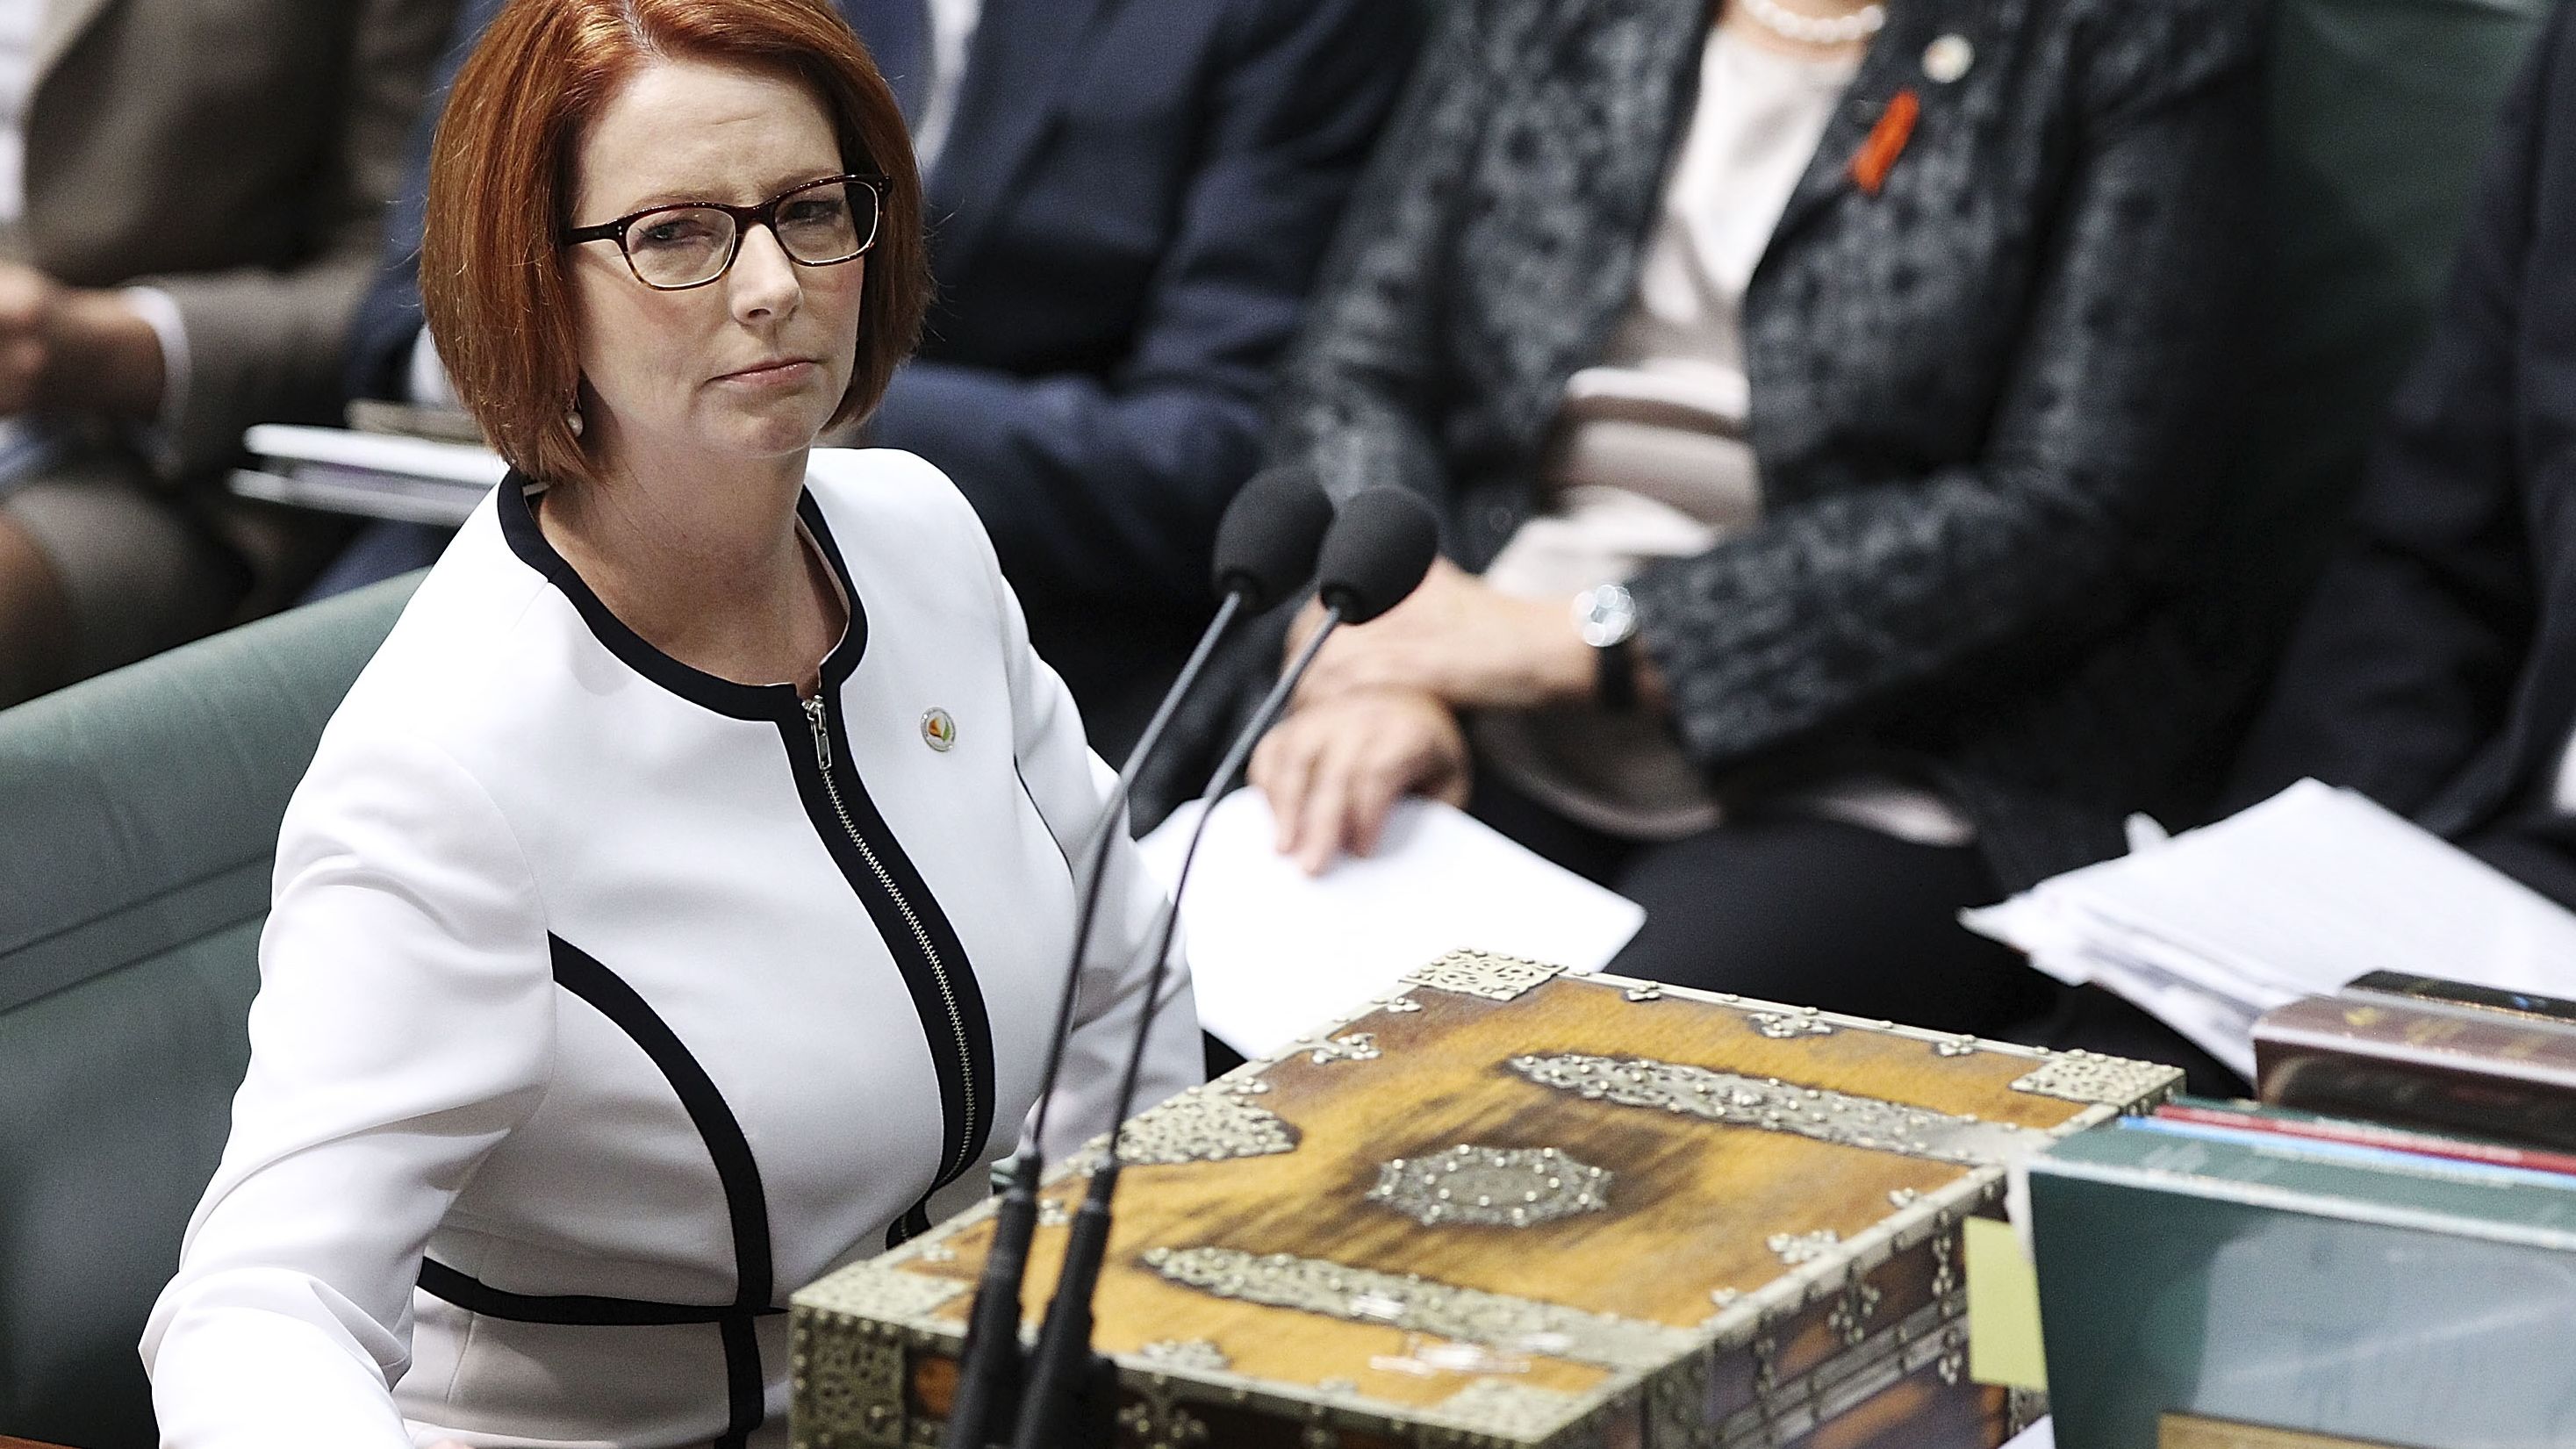 Prime Minister Julia Gillard during House of Representatives question time on March 21, 2013 in Canberra, Australia.